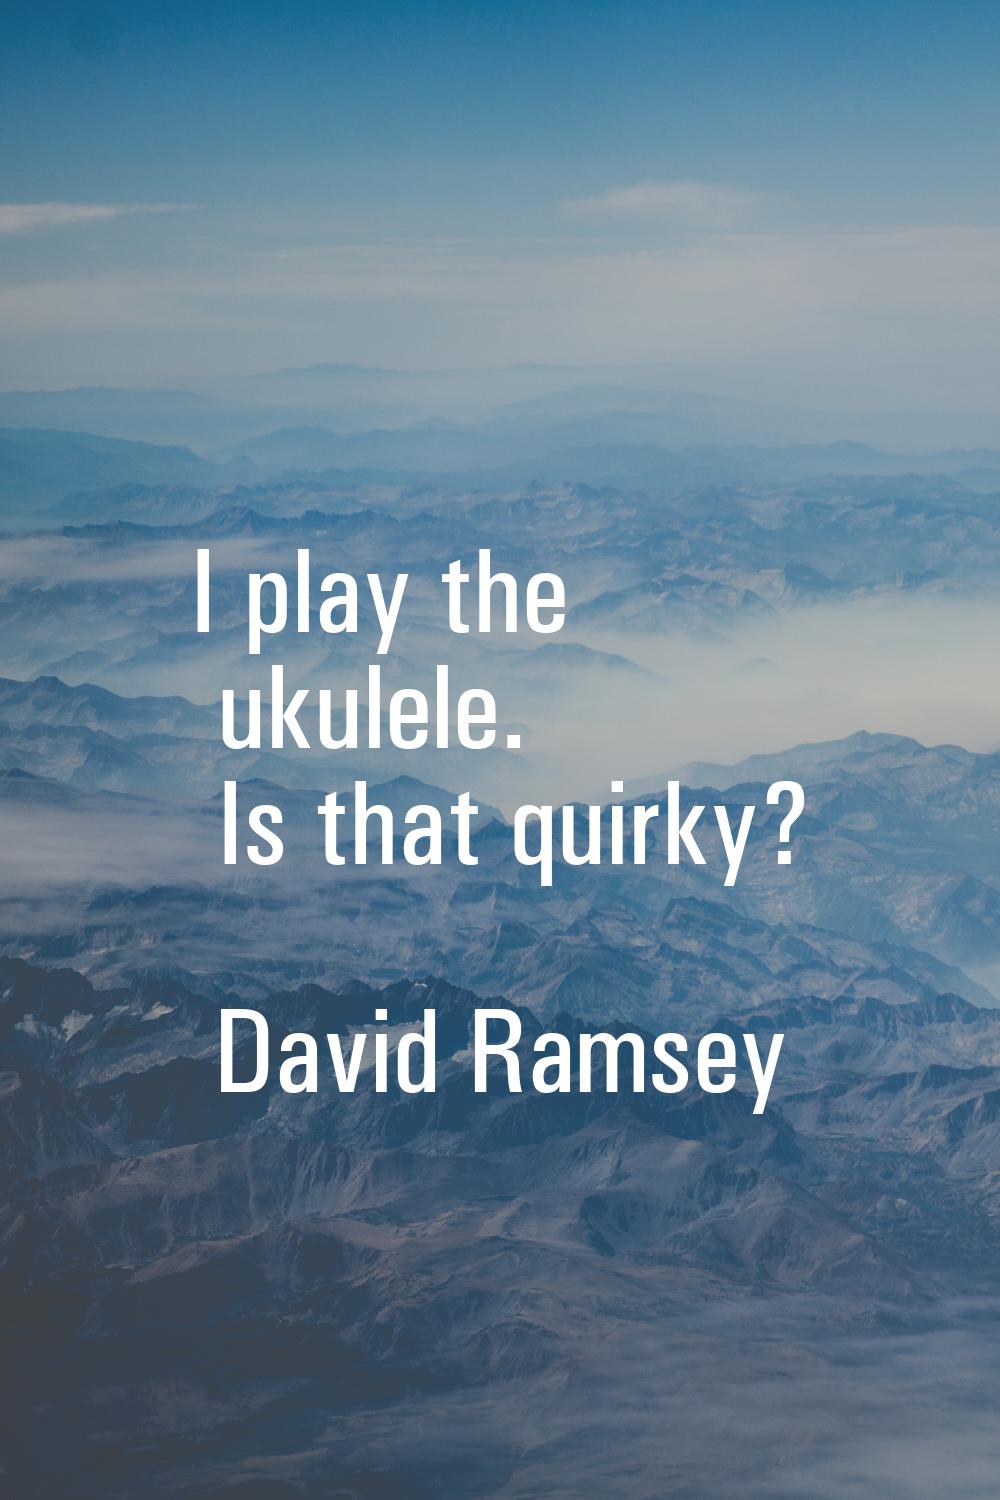 I play the ukulele. Is that quirky?